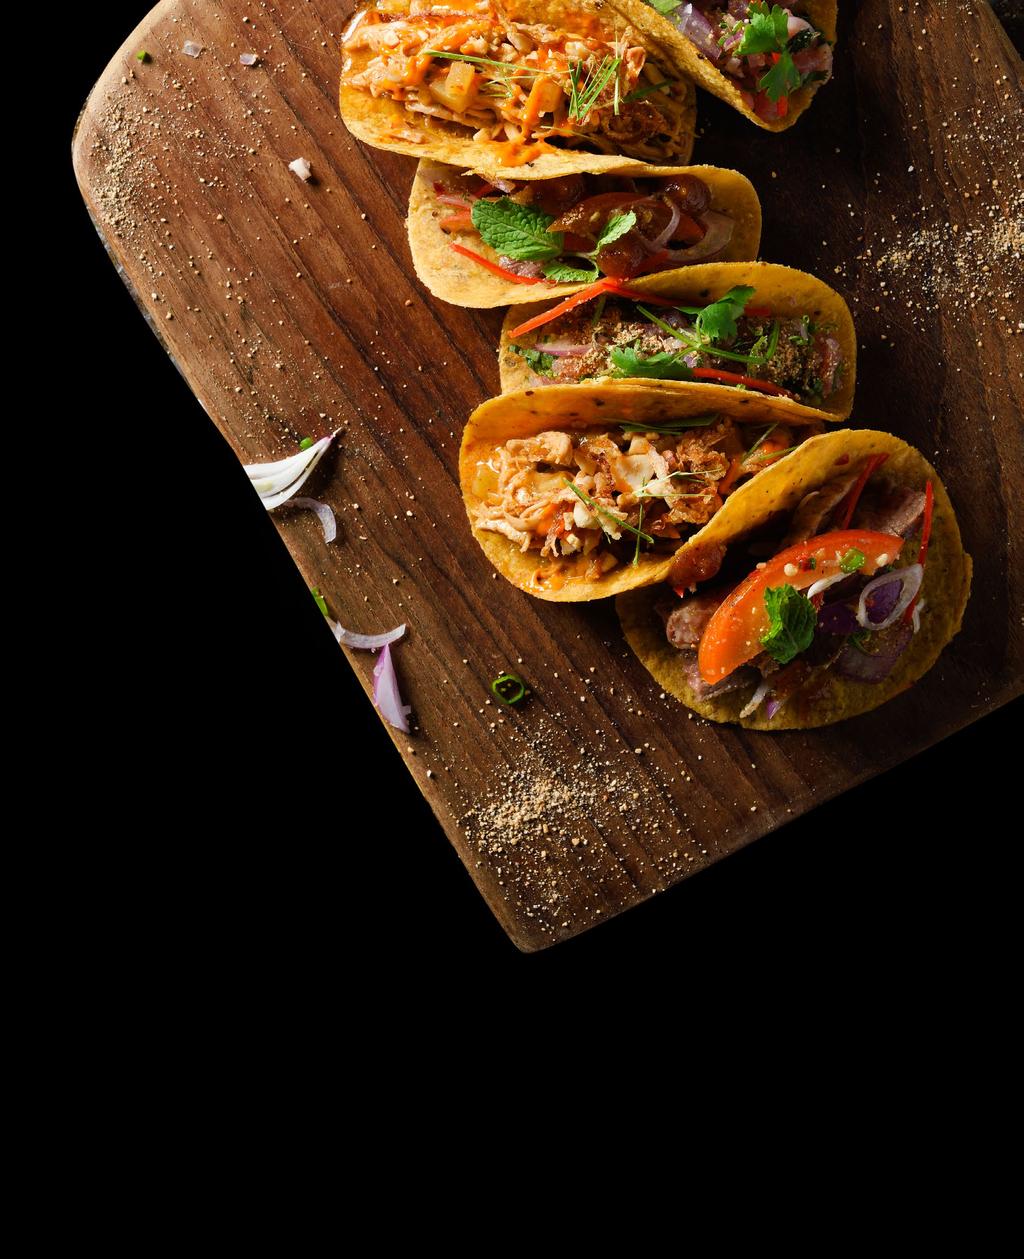 LOCO TACOS Mexican favorite gets a fun twist with local flavors this September at the R Bar s latest exciting Loco Tacos deal.